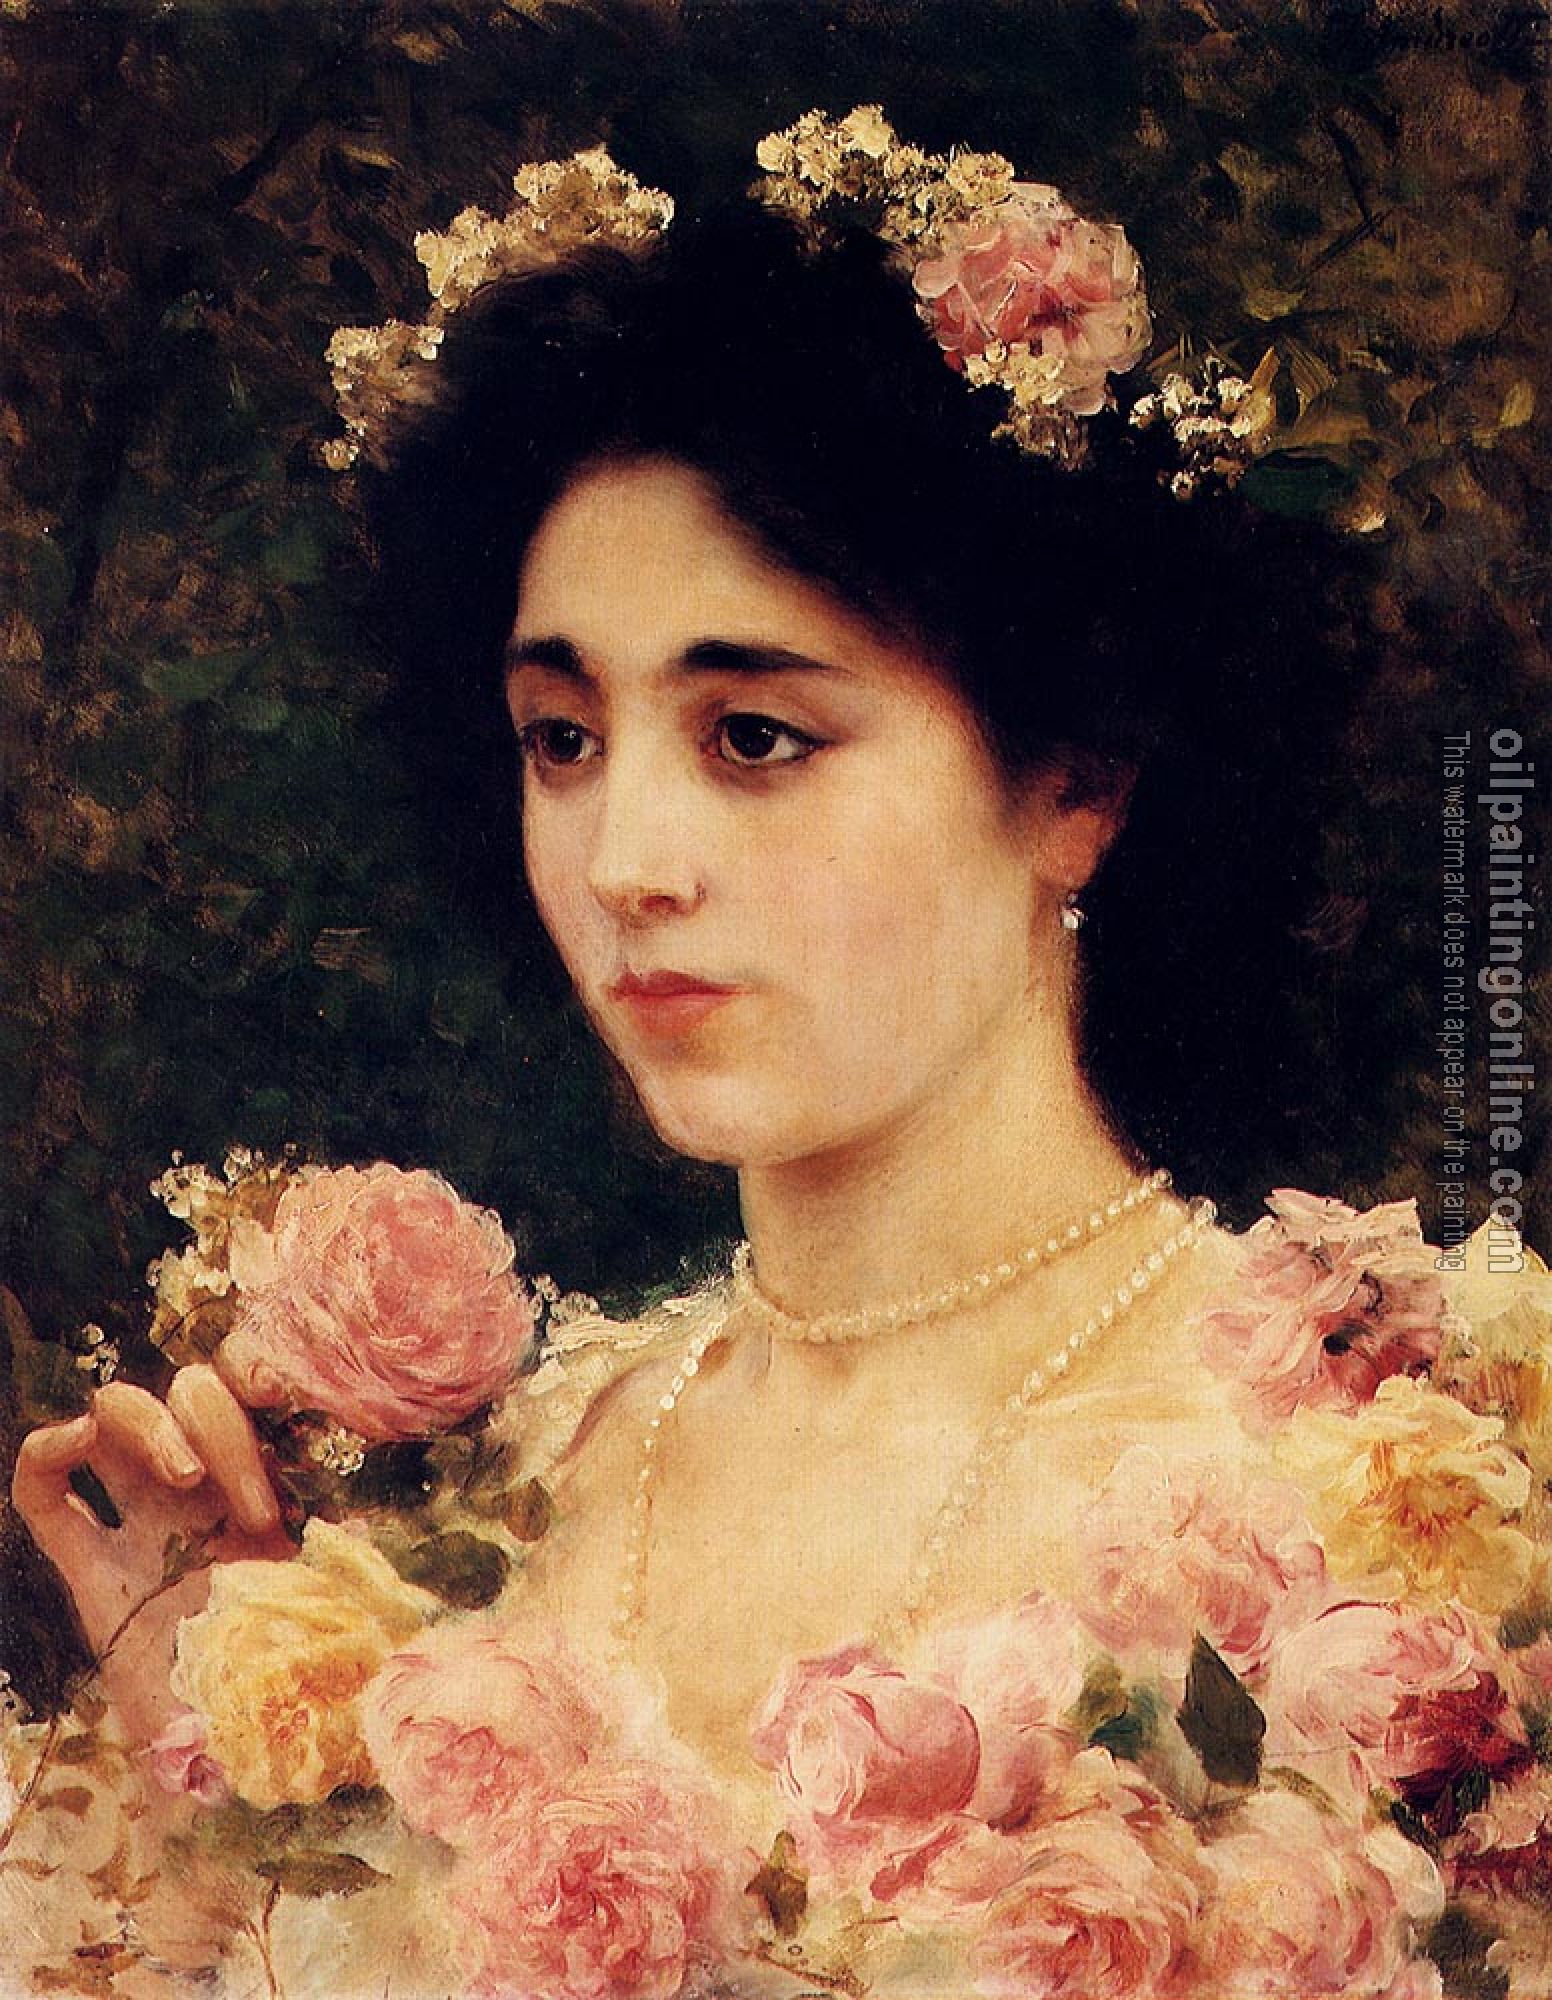 Federico Andreotti - The Pink Rose